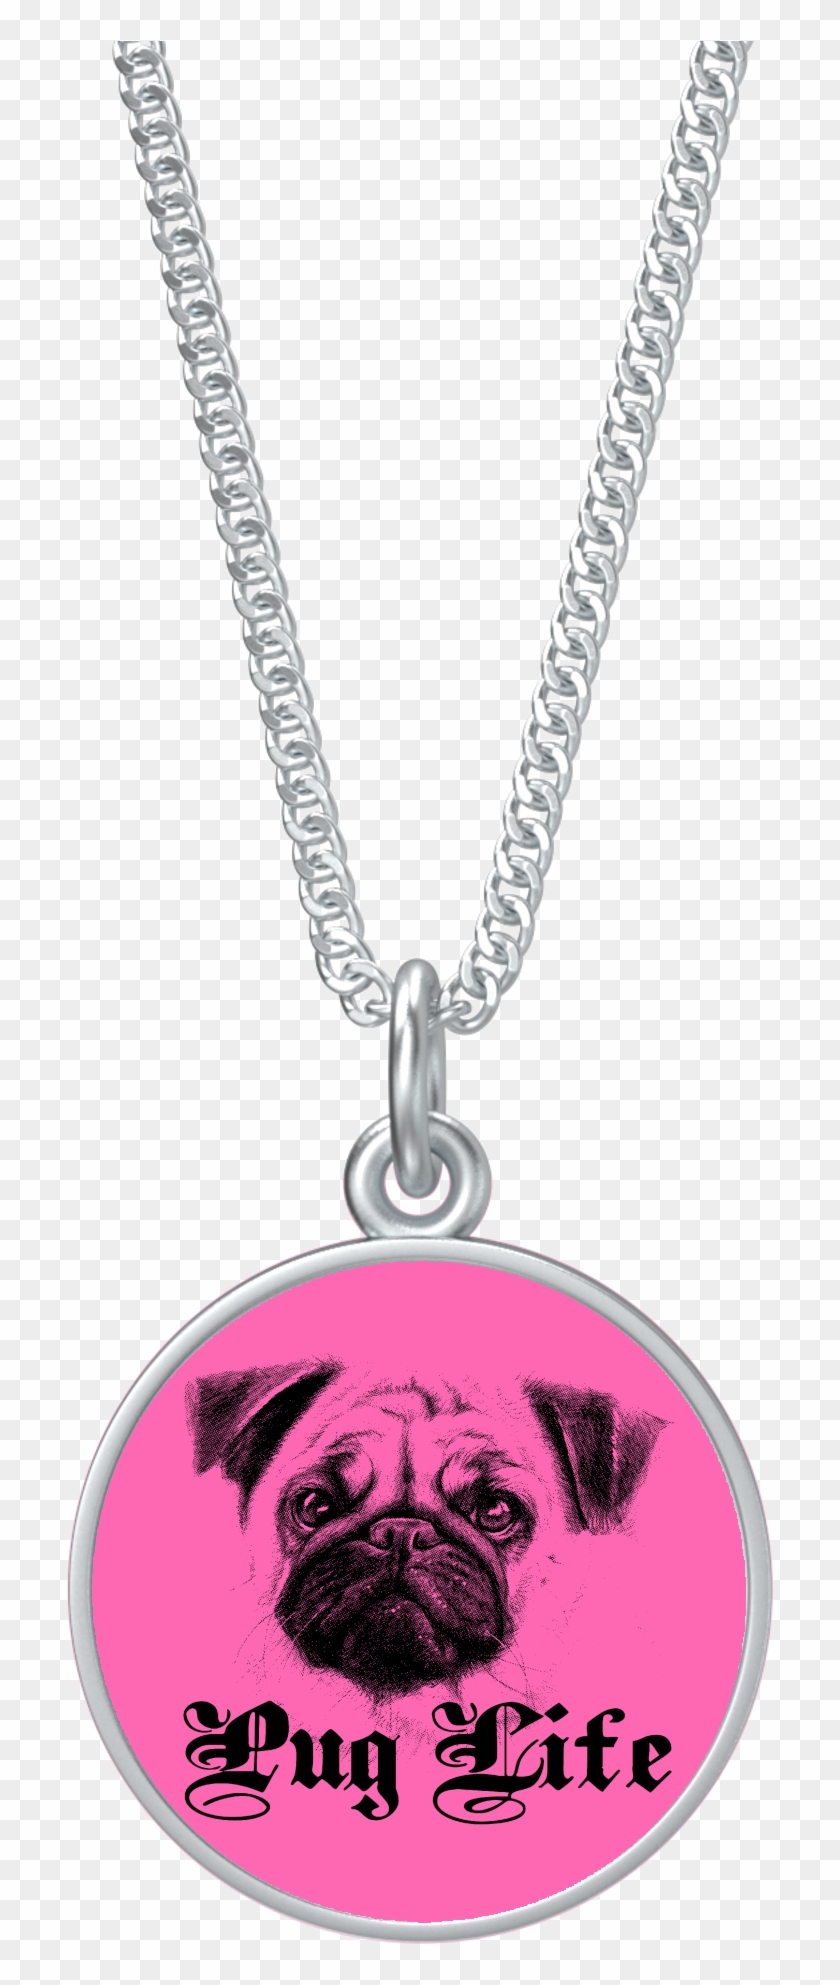 Beautiful Pug Life Necklace For Pug Dog Owners - Necklace Clipart